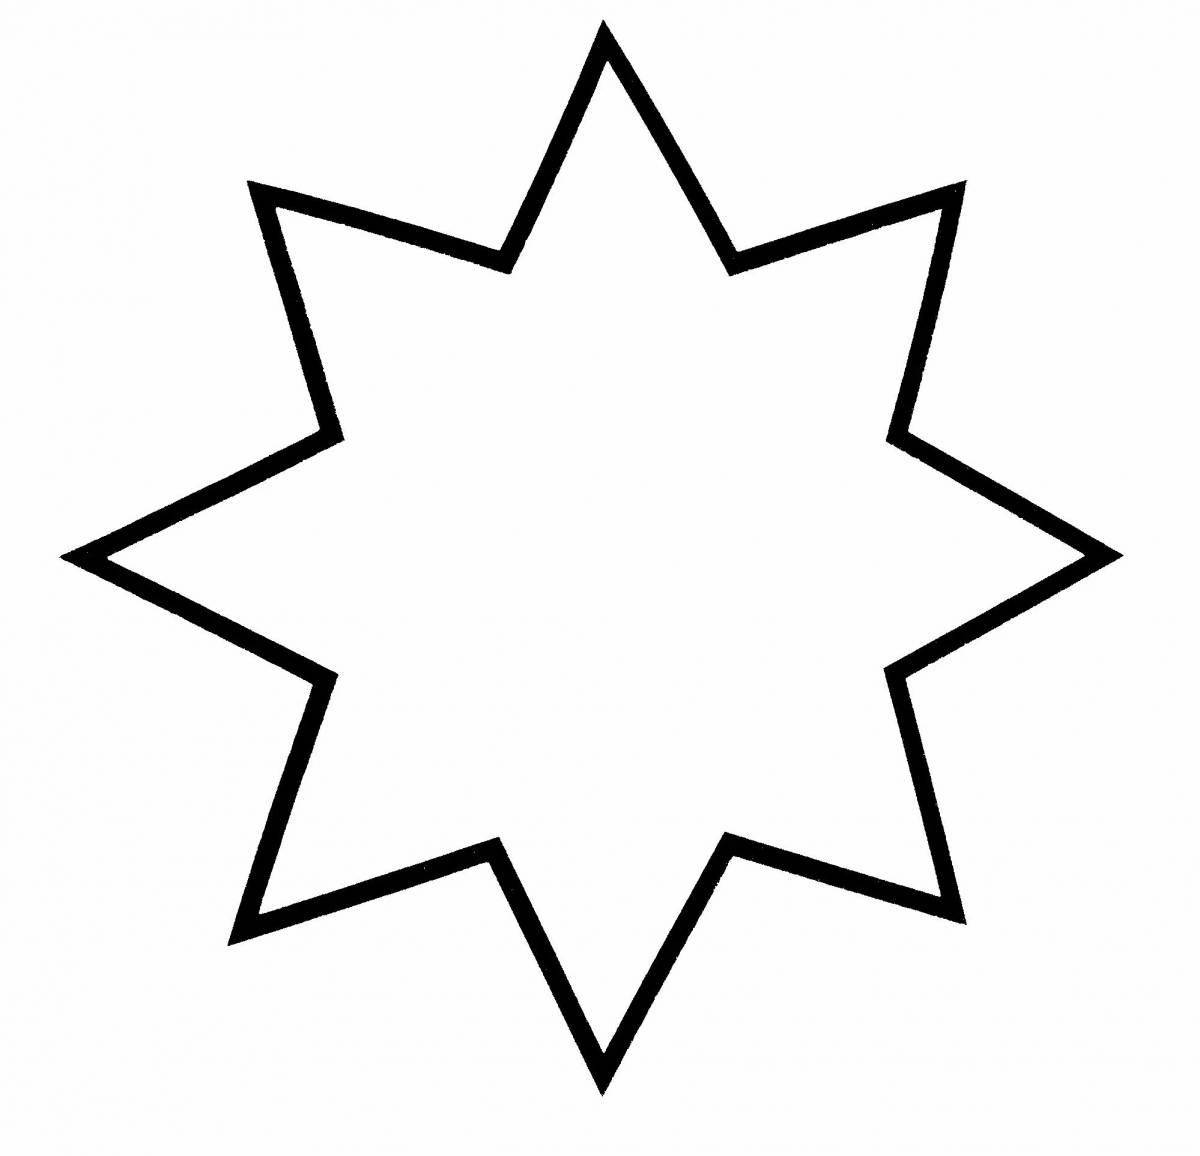 Exquisite six-pointed star coloring book